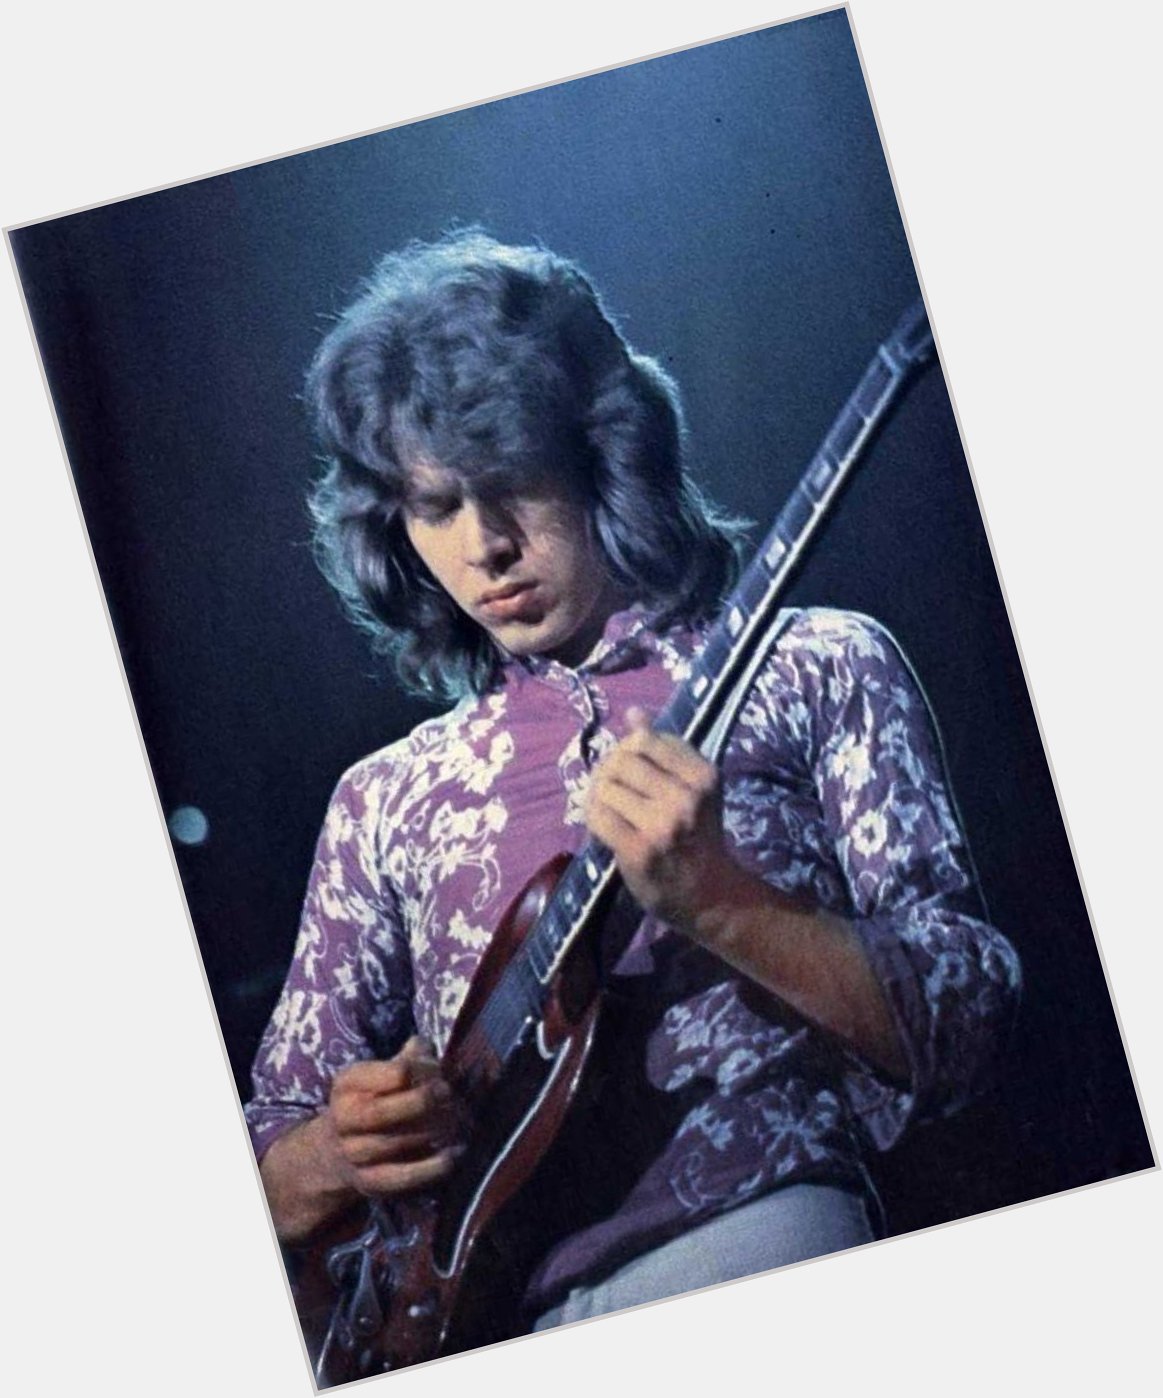 Happy 74th birthday to Mick Taylor, who was born on this day in 1949. 